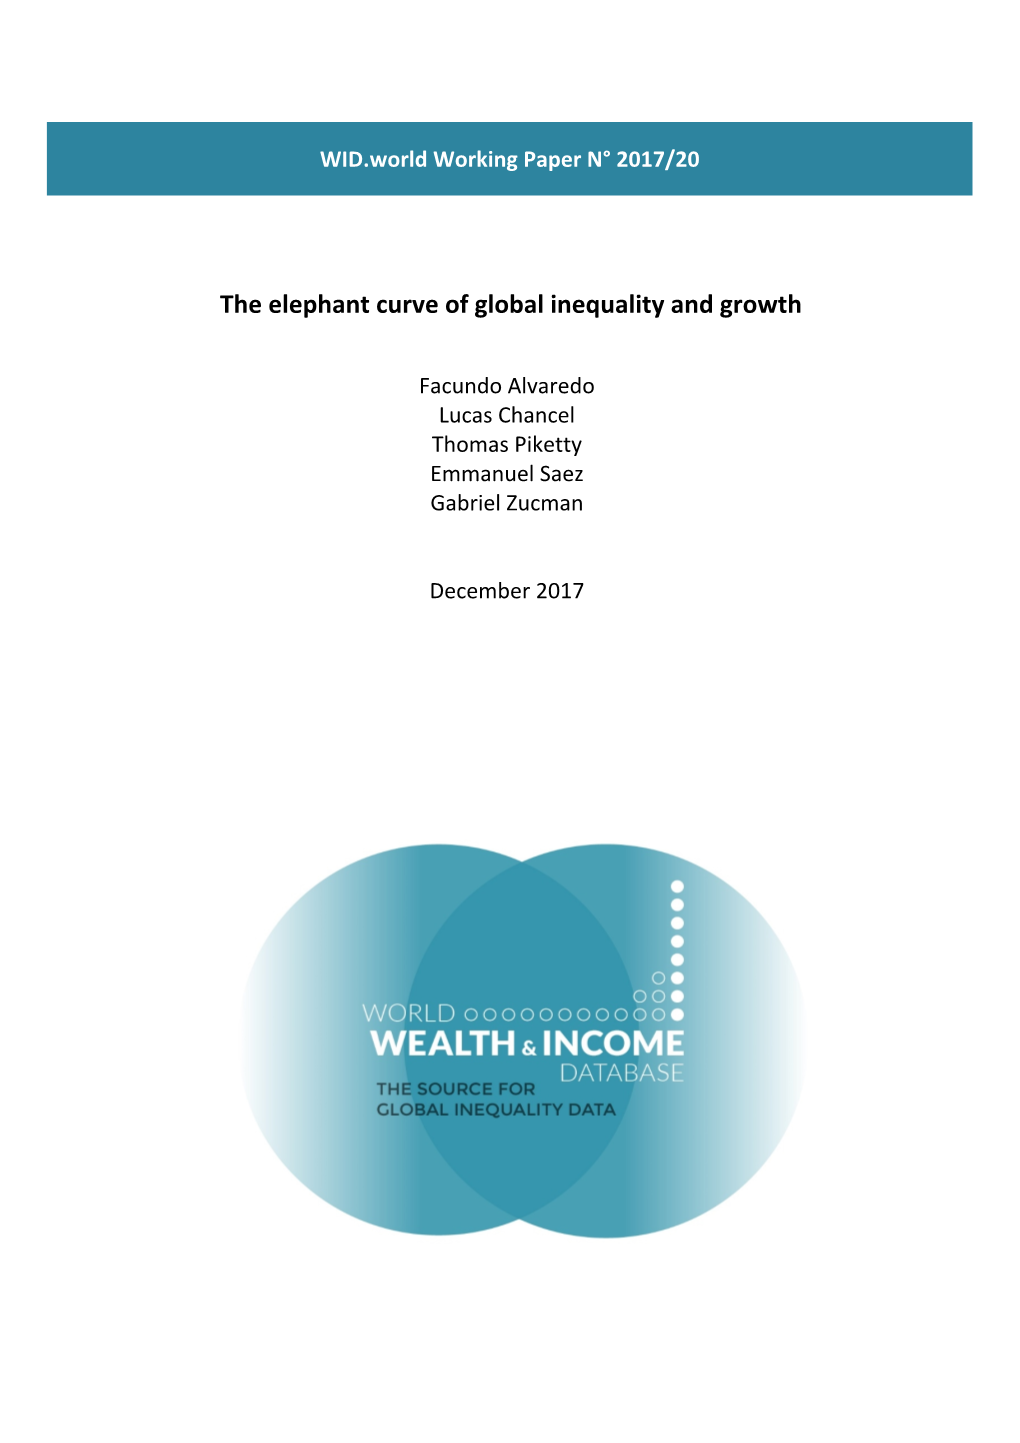 The Elephant Curve of Global Inequality and Growth